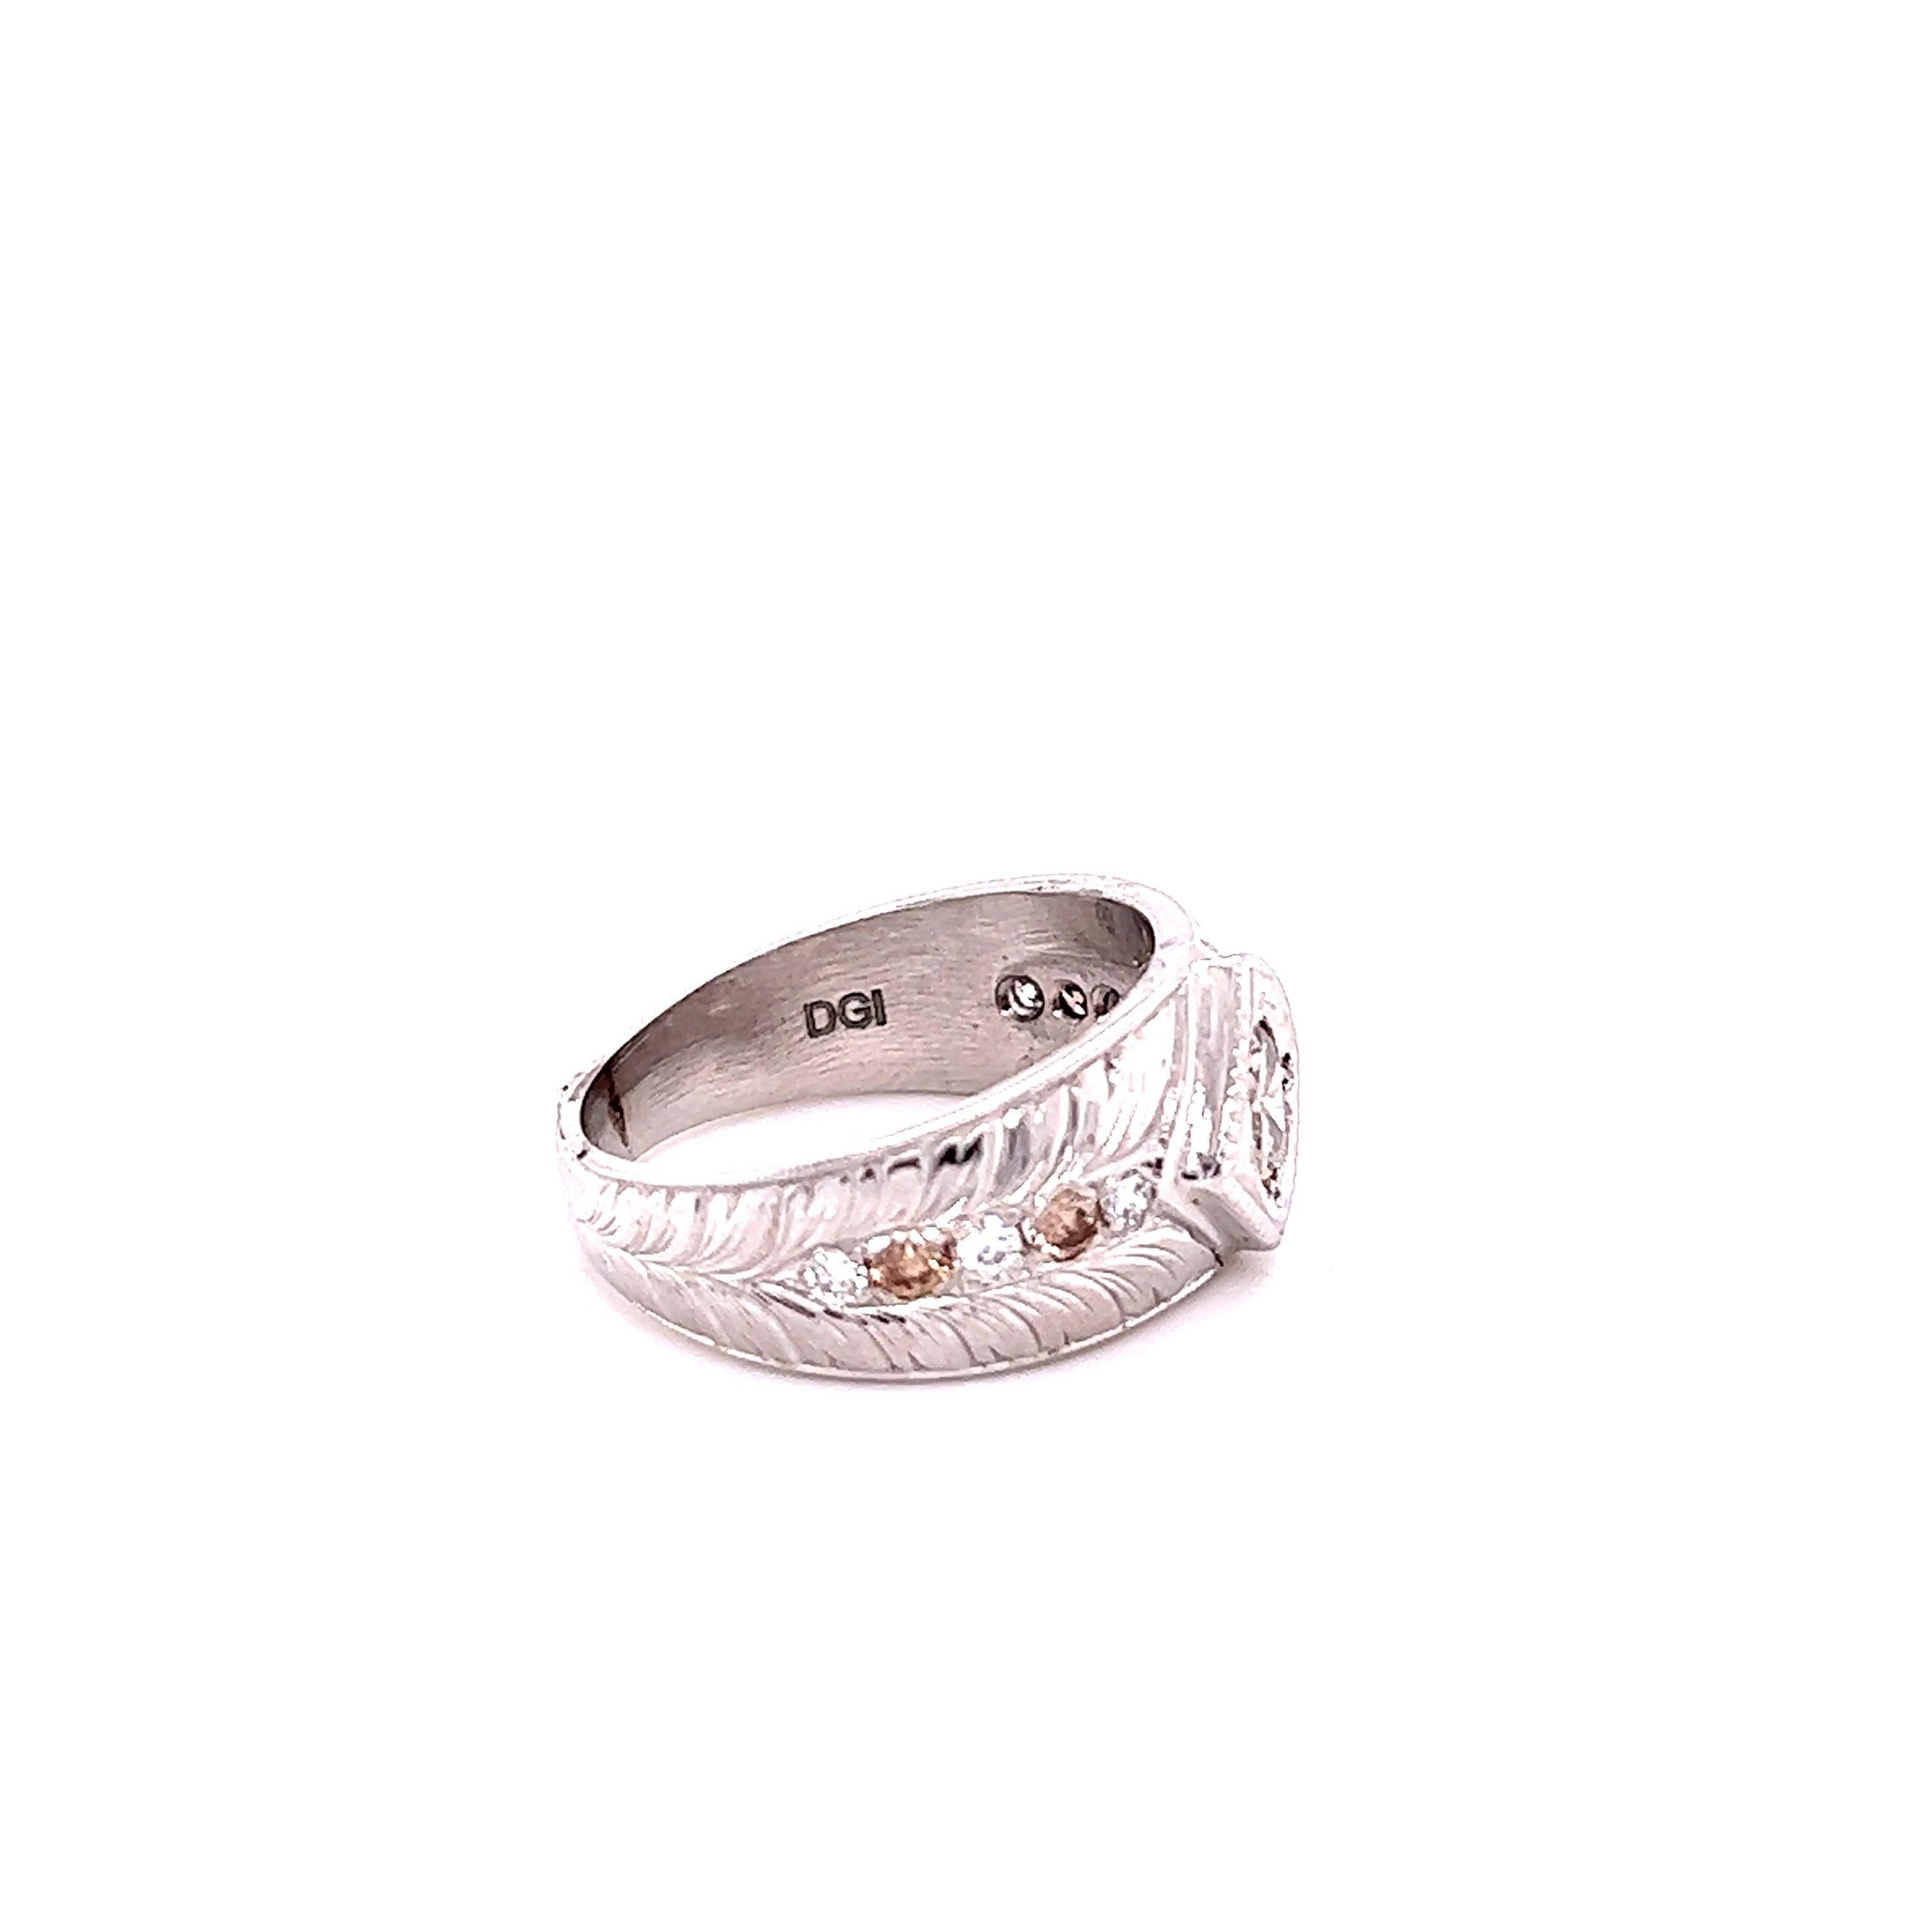 This band has a Natural Champagne Diamond that weighs 0.50 carats and has 10 Champagne Diamonds and White Diamonds on the sides of the ring that weigh 0.40 carats. The total carat weight of the ring is 0.90 carats. 
Curated in 14 Karat White Gold